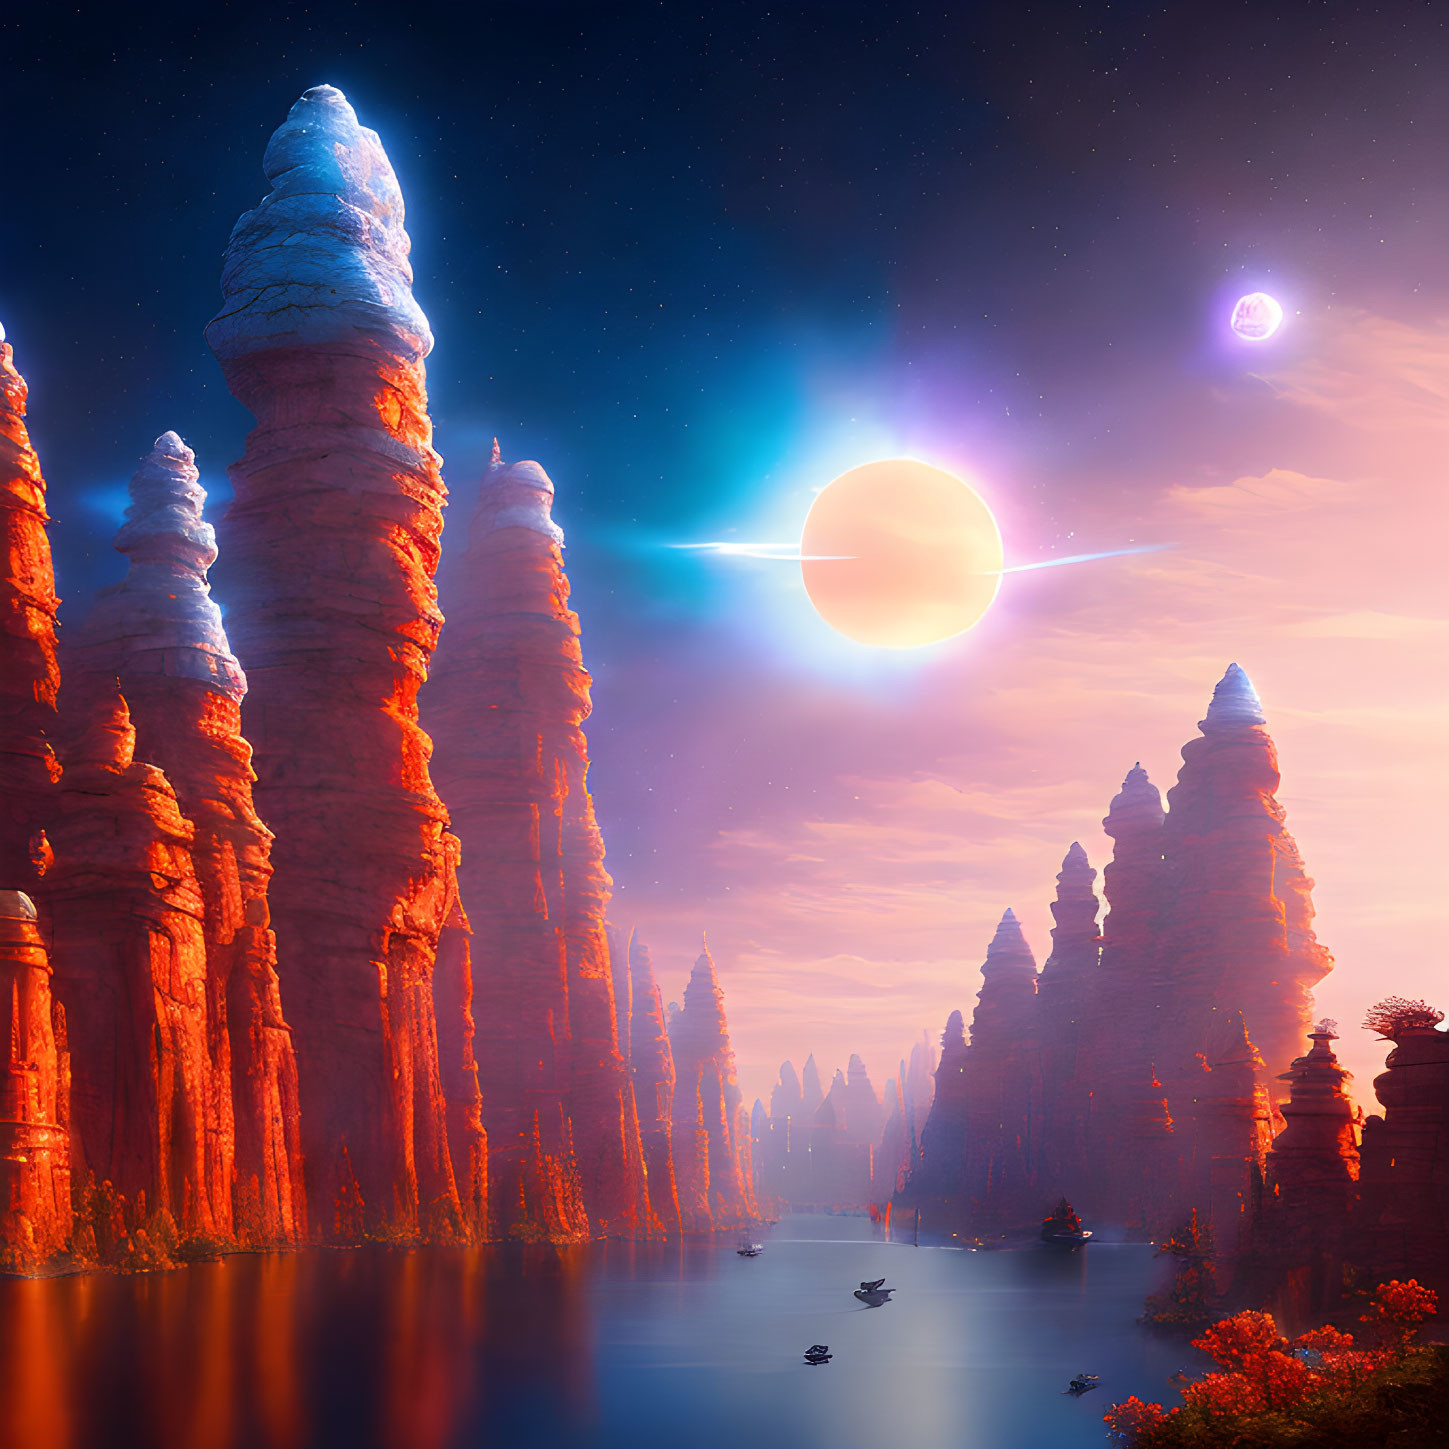 Surreal landscape with tall rock formations, calm lake, and vibrant alien sky